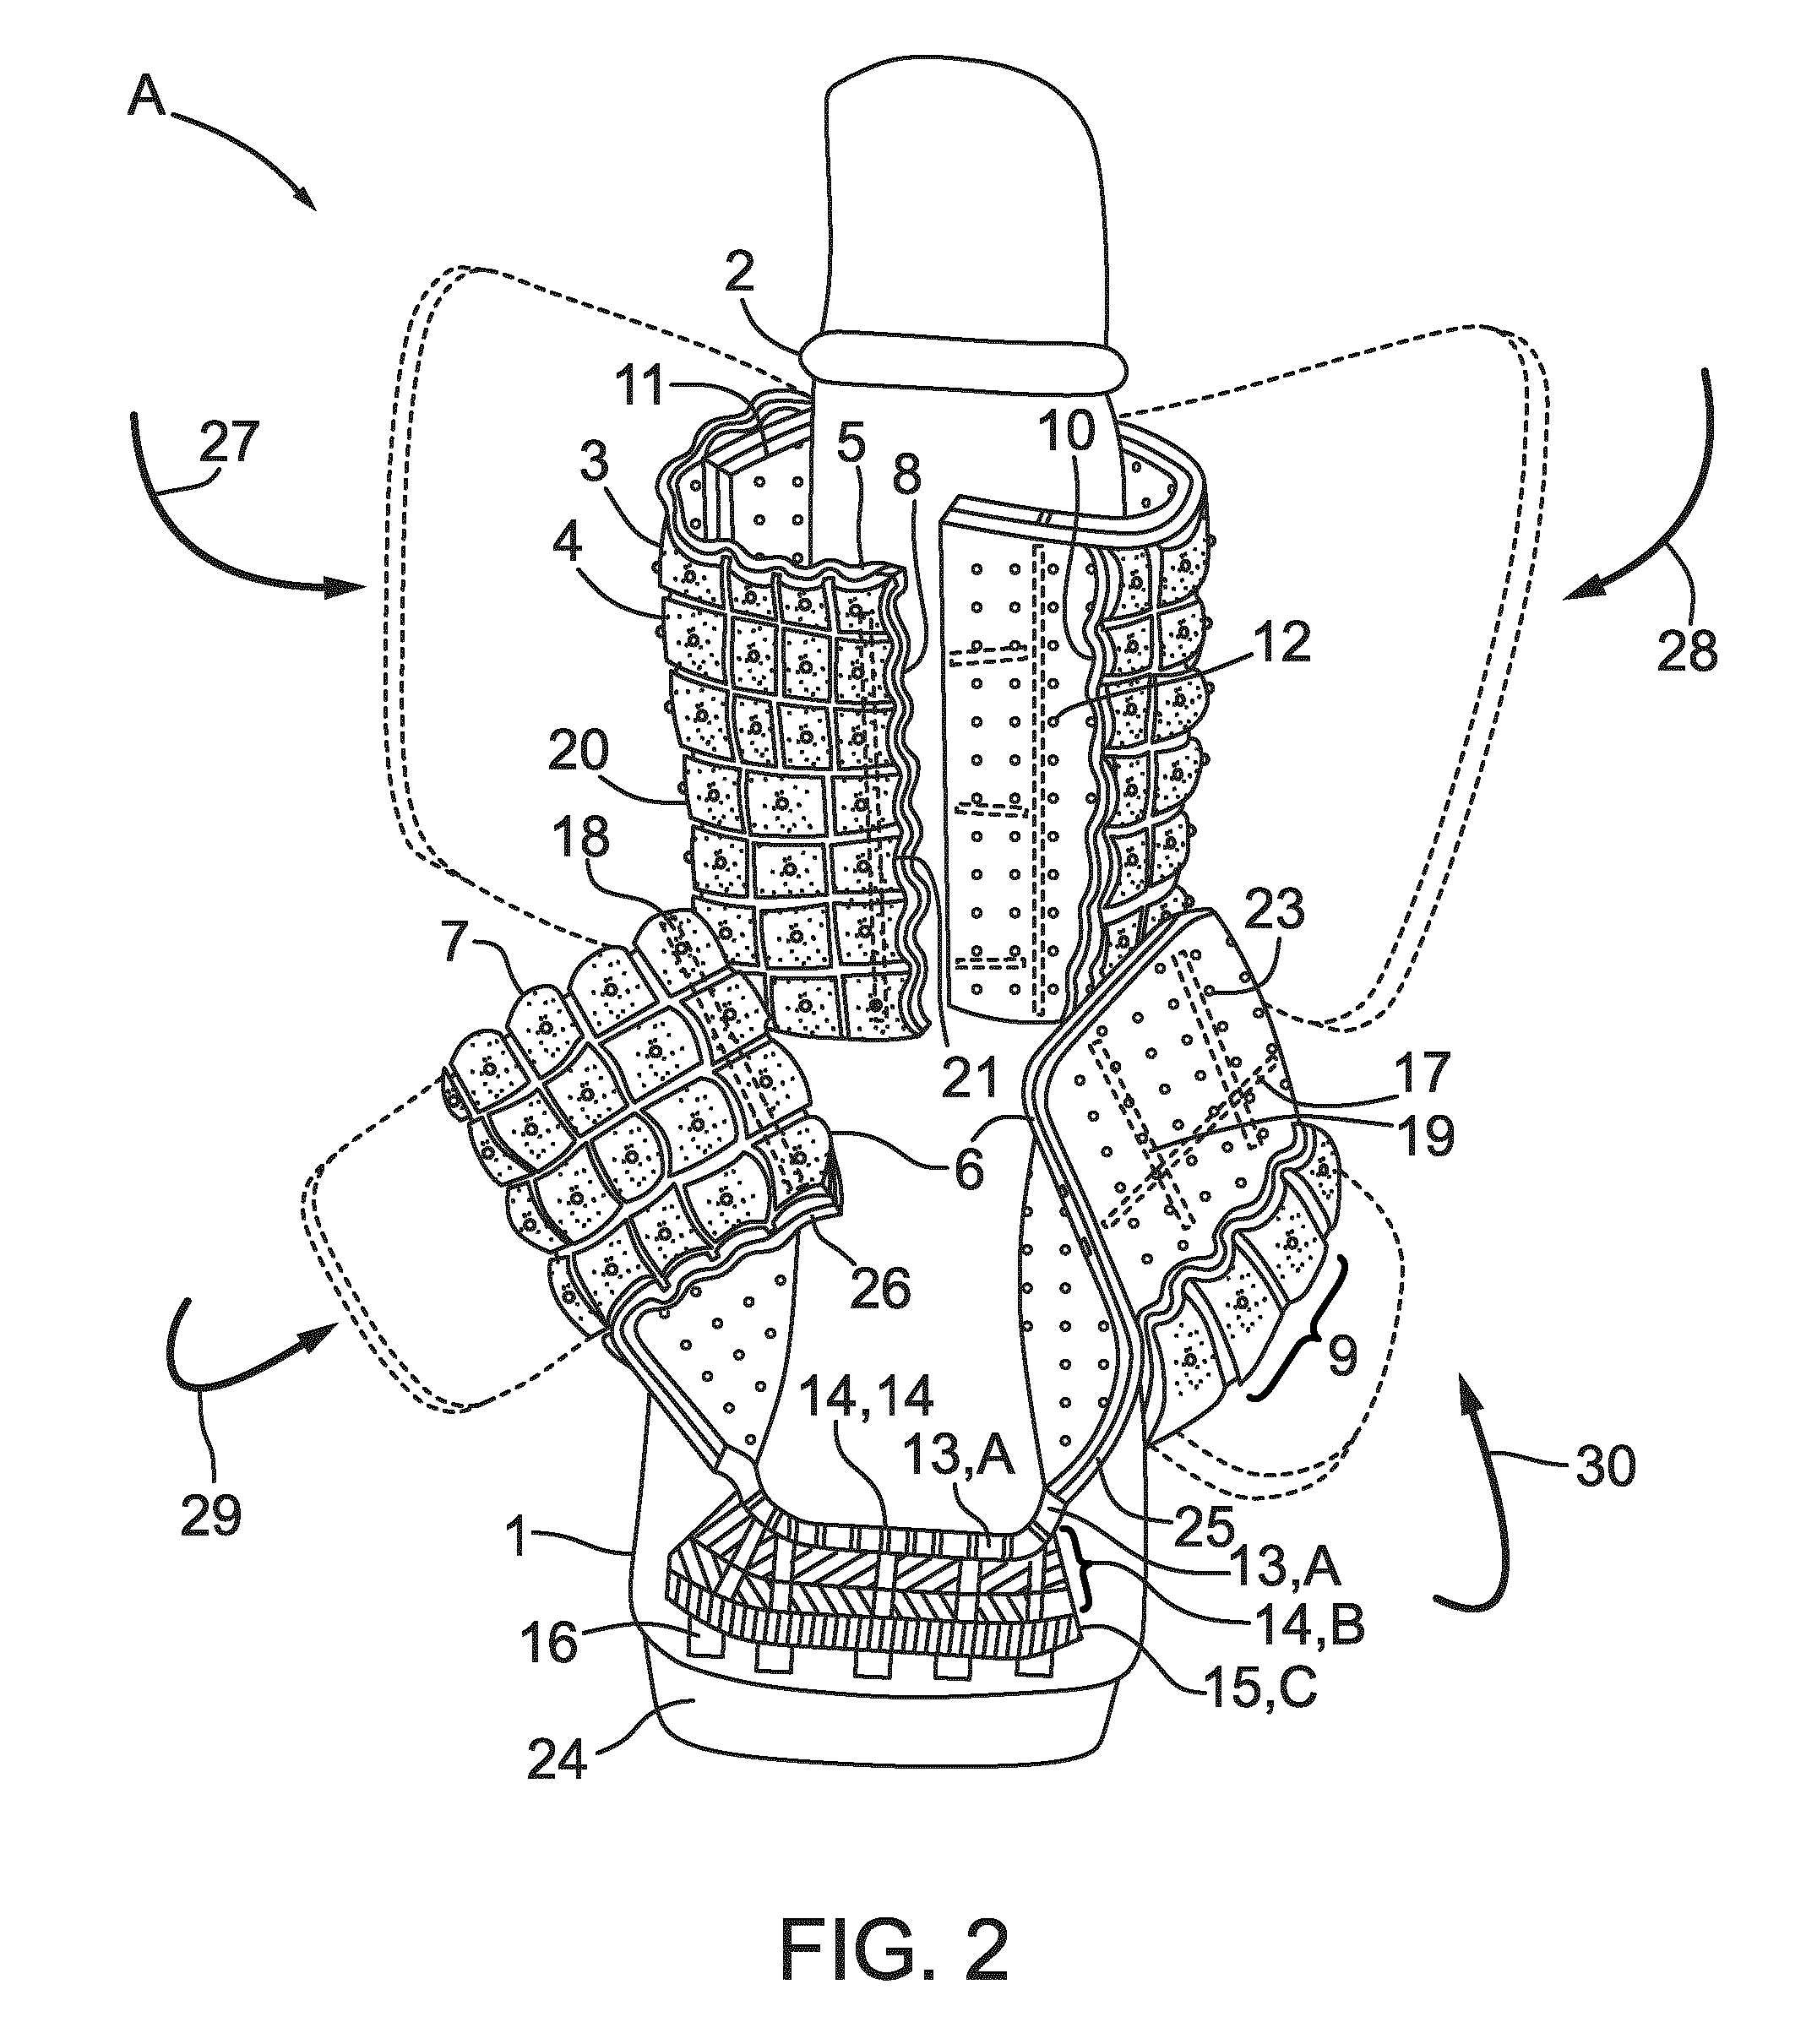 Porous orthopedic or prosthetic support having removable cushioning and scaffolding layers